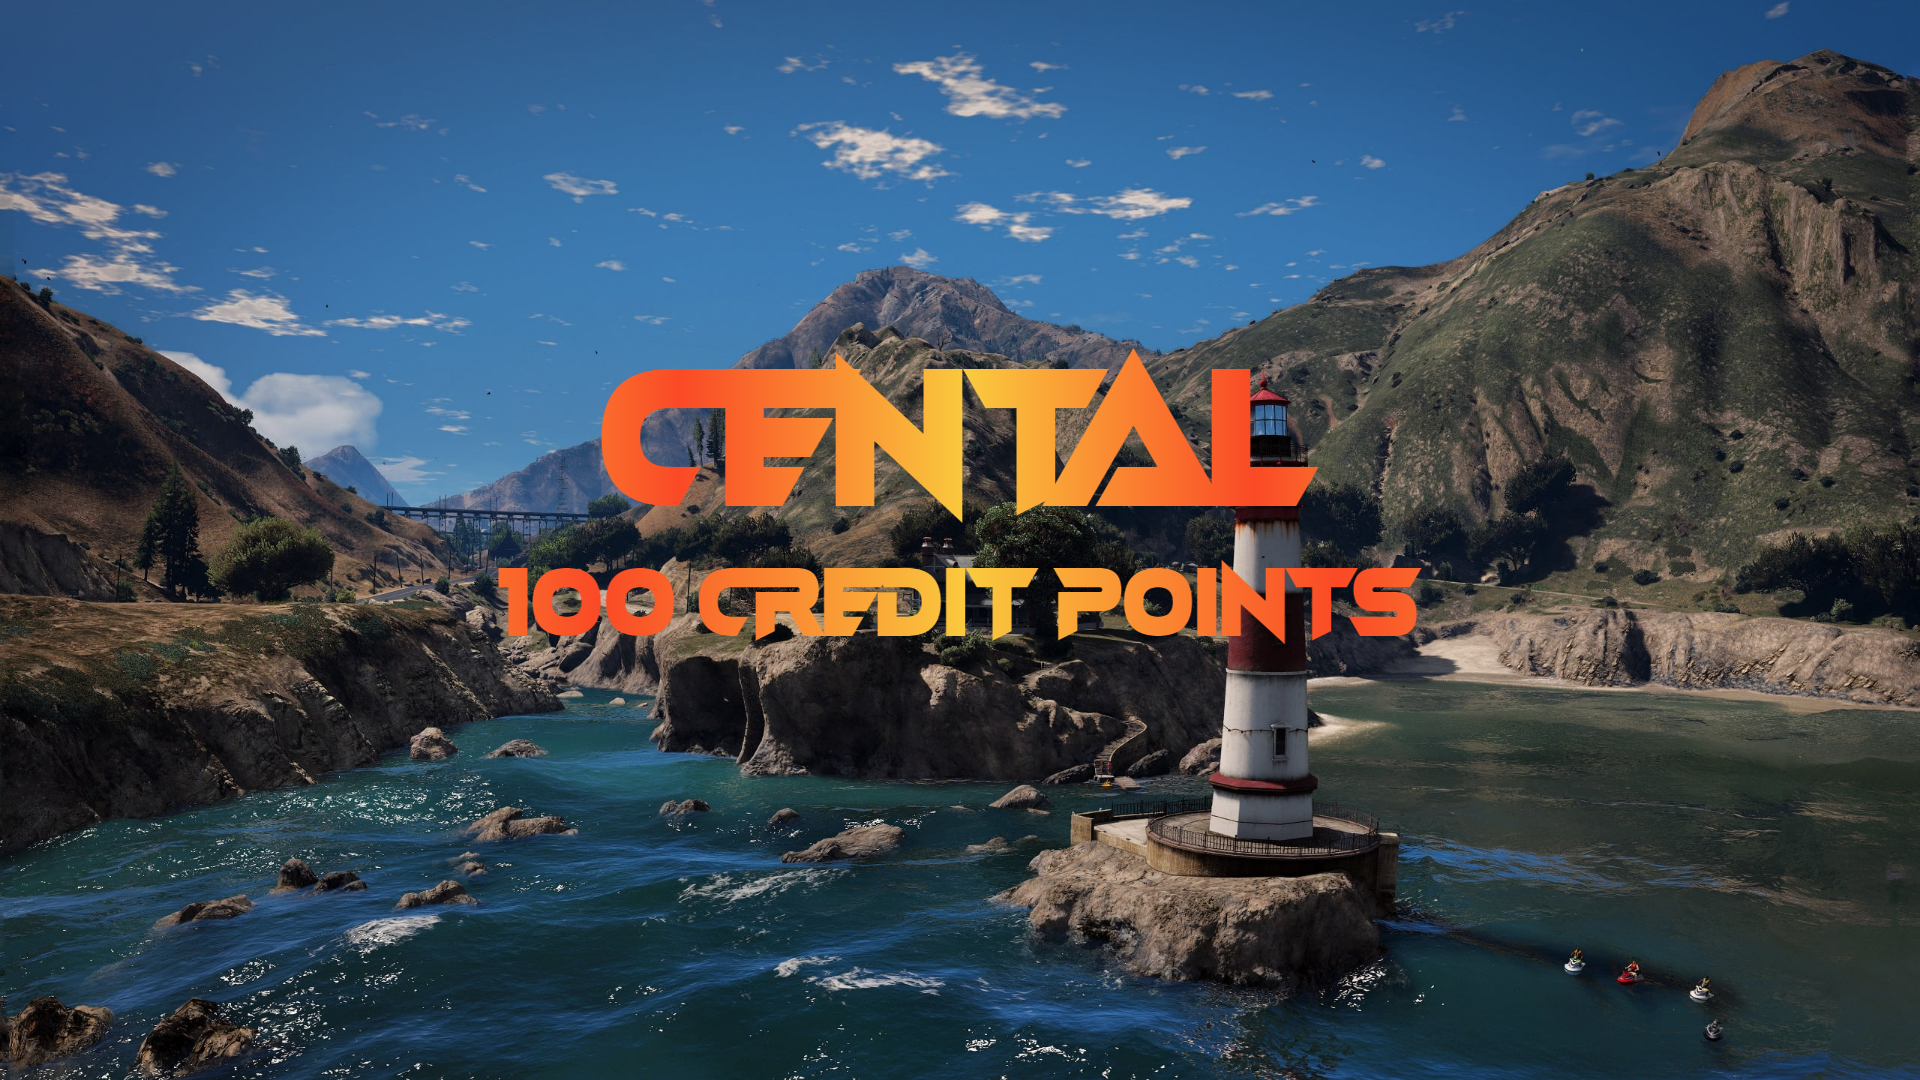 (11.29$) CentralRP - 100 Credit Points Gift Card